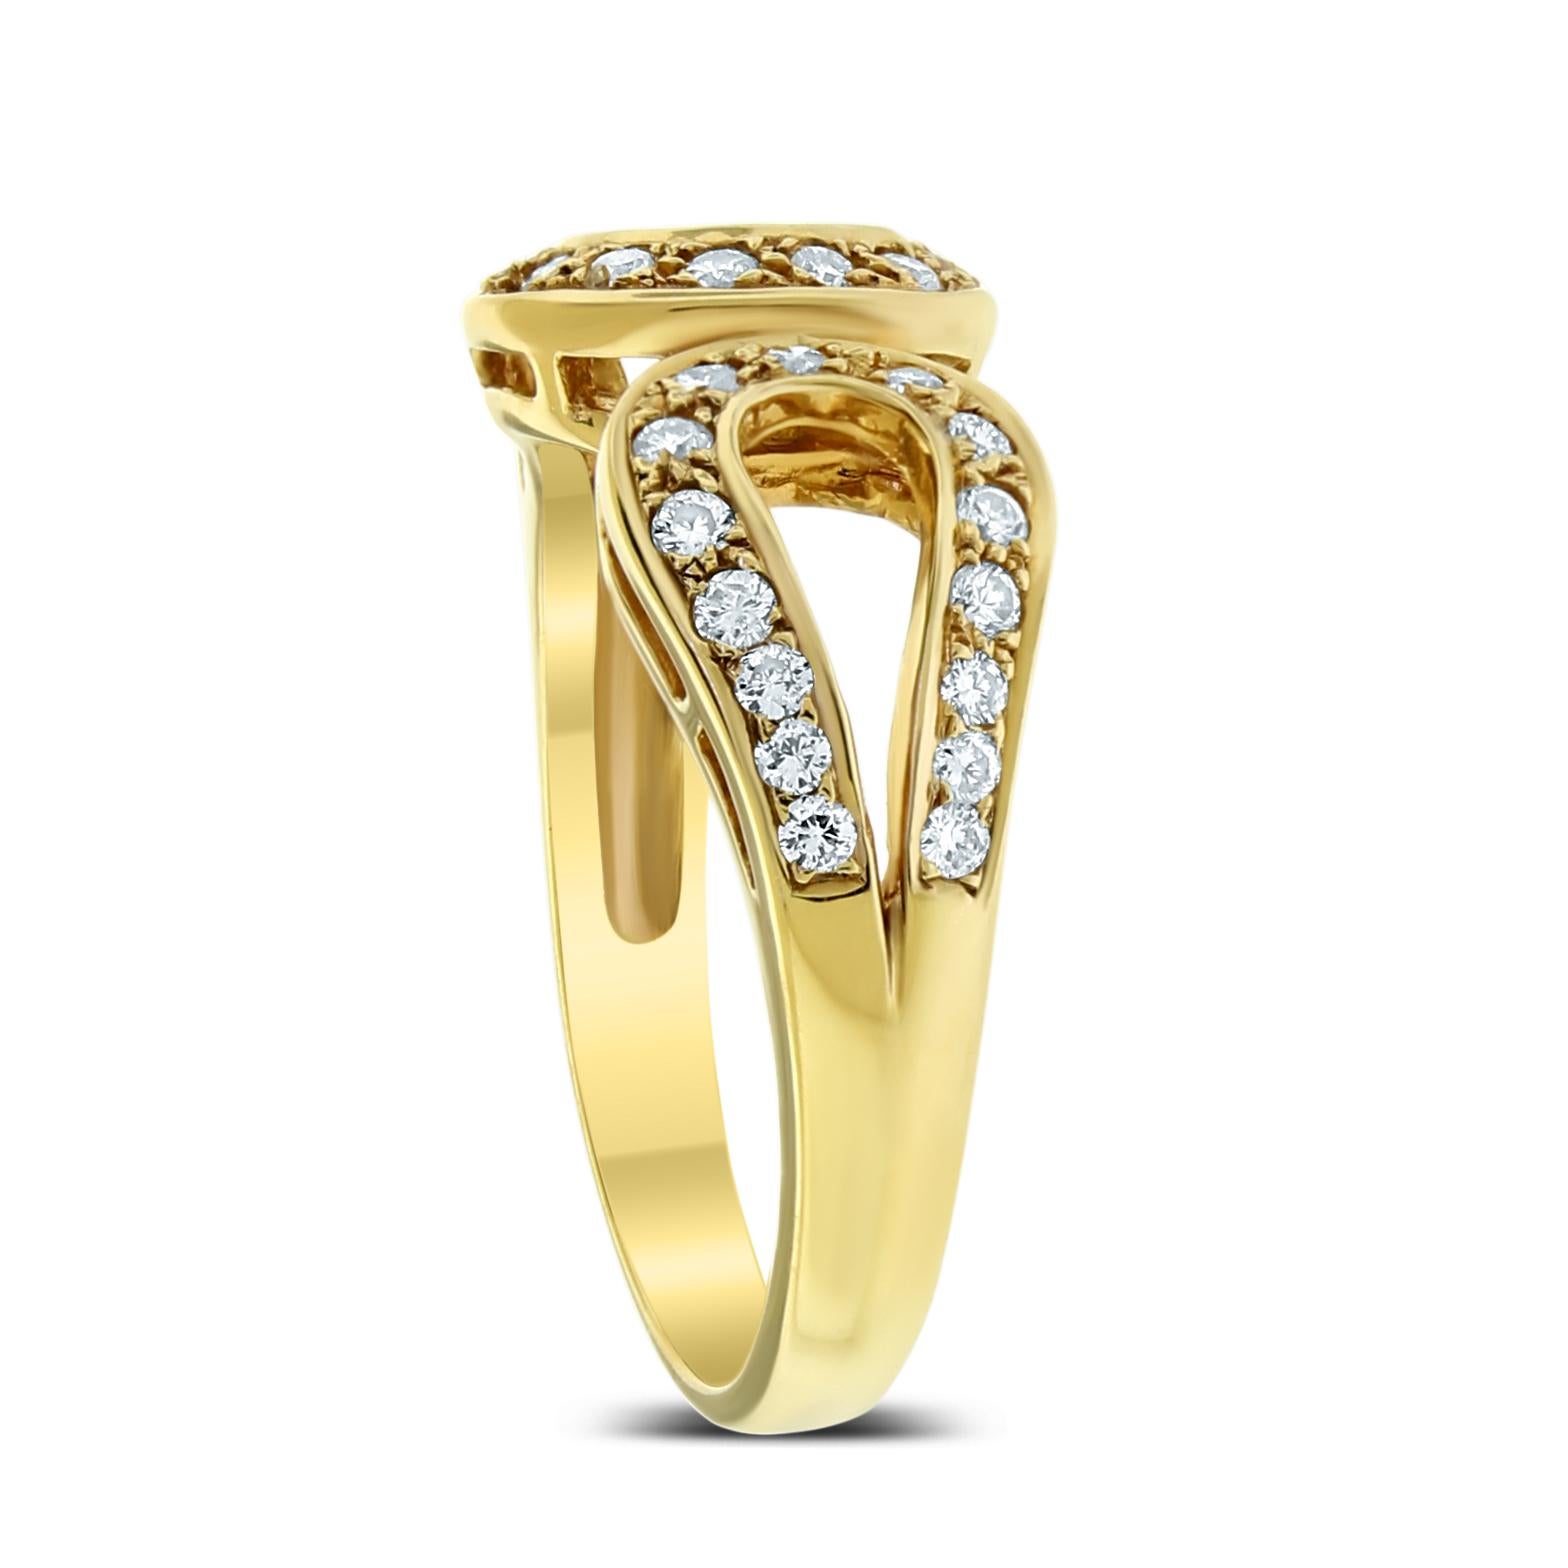 A classically styled ring in yellow gold, the Raaga band depicts a meeting, a coming together in its design.

Total Diamond Weight: 0.50 ct
Diamond Shape: Rounds
Diamond Color: H 
Diamond Clarity: VS

Metal: 14K Yellow Gold
Metal Wt: 4.64 gms